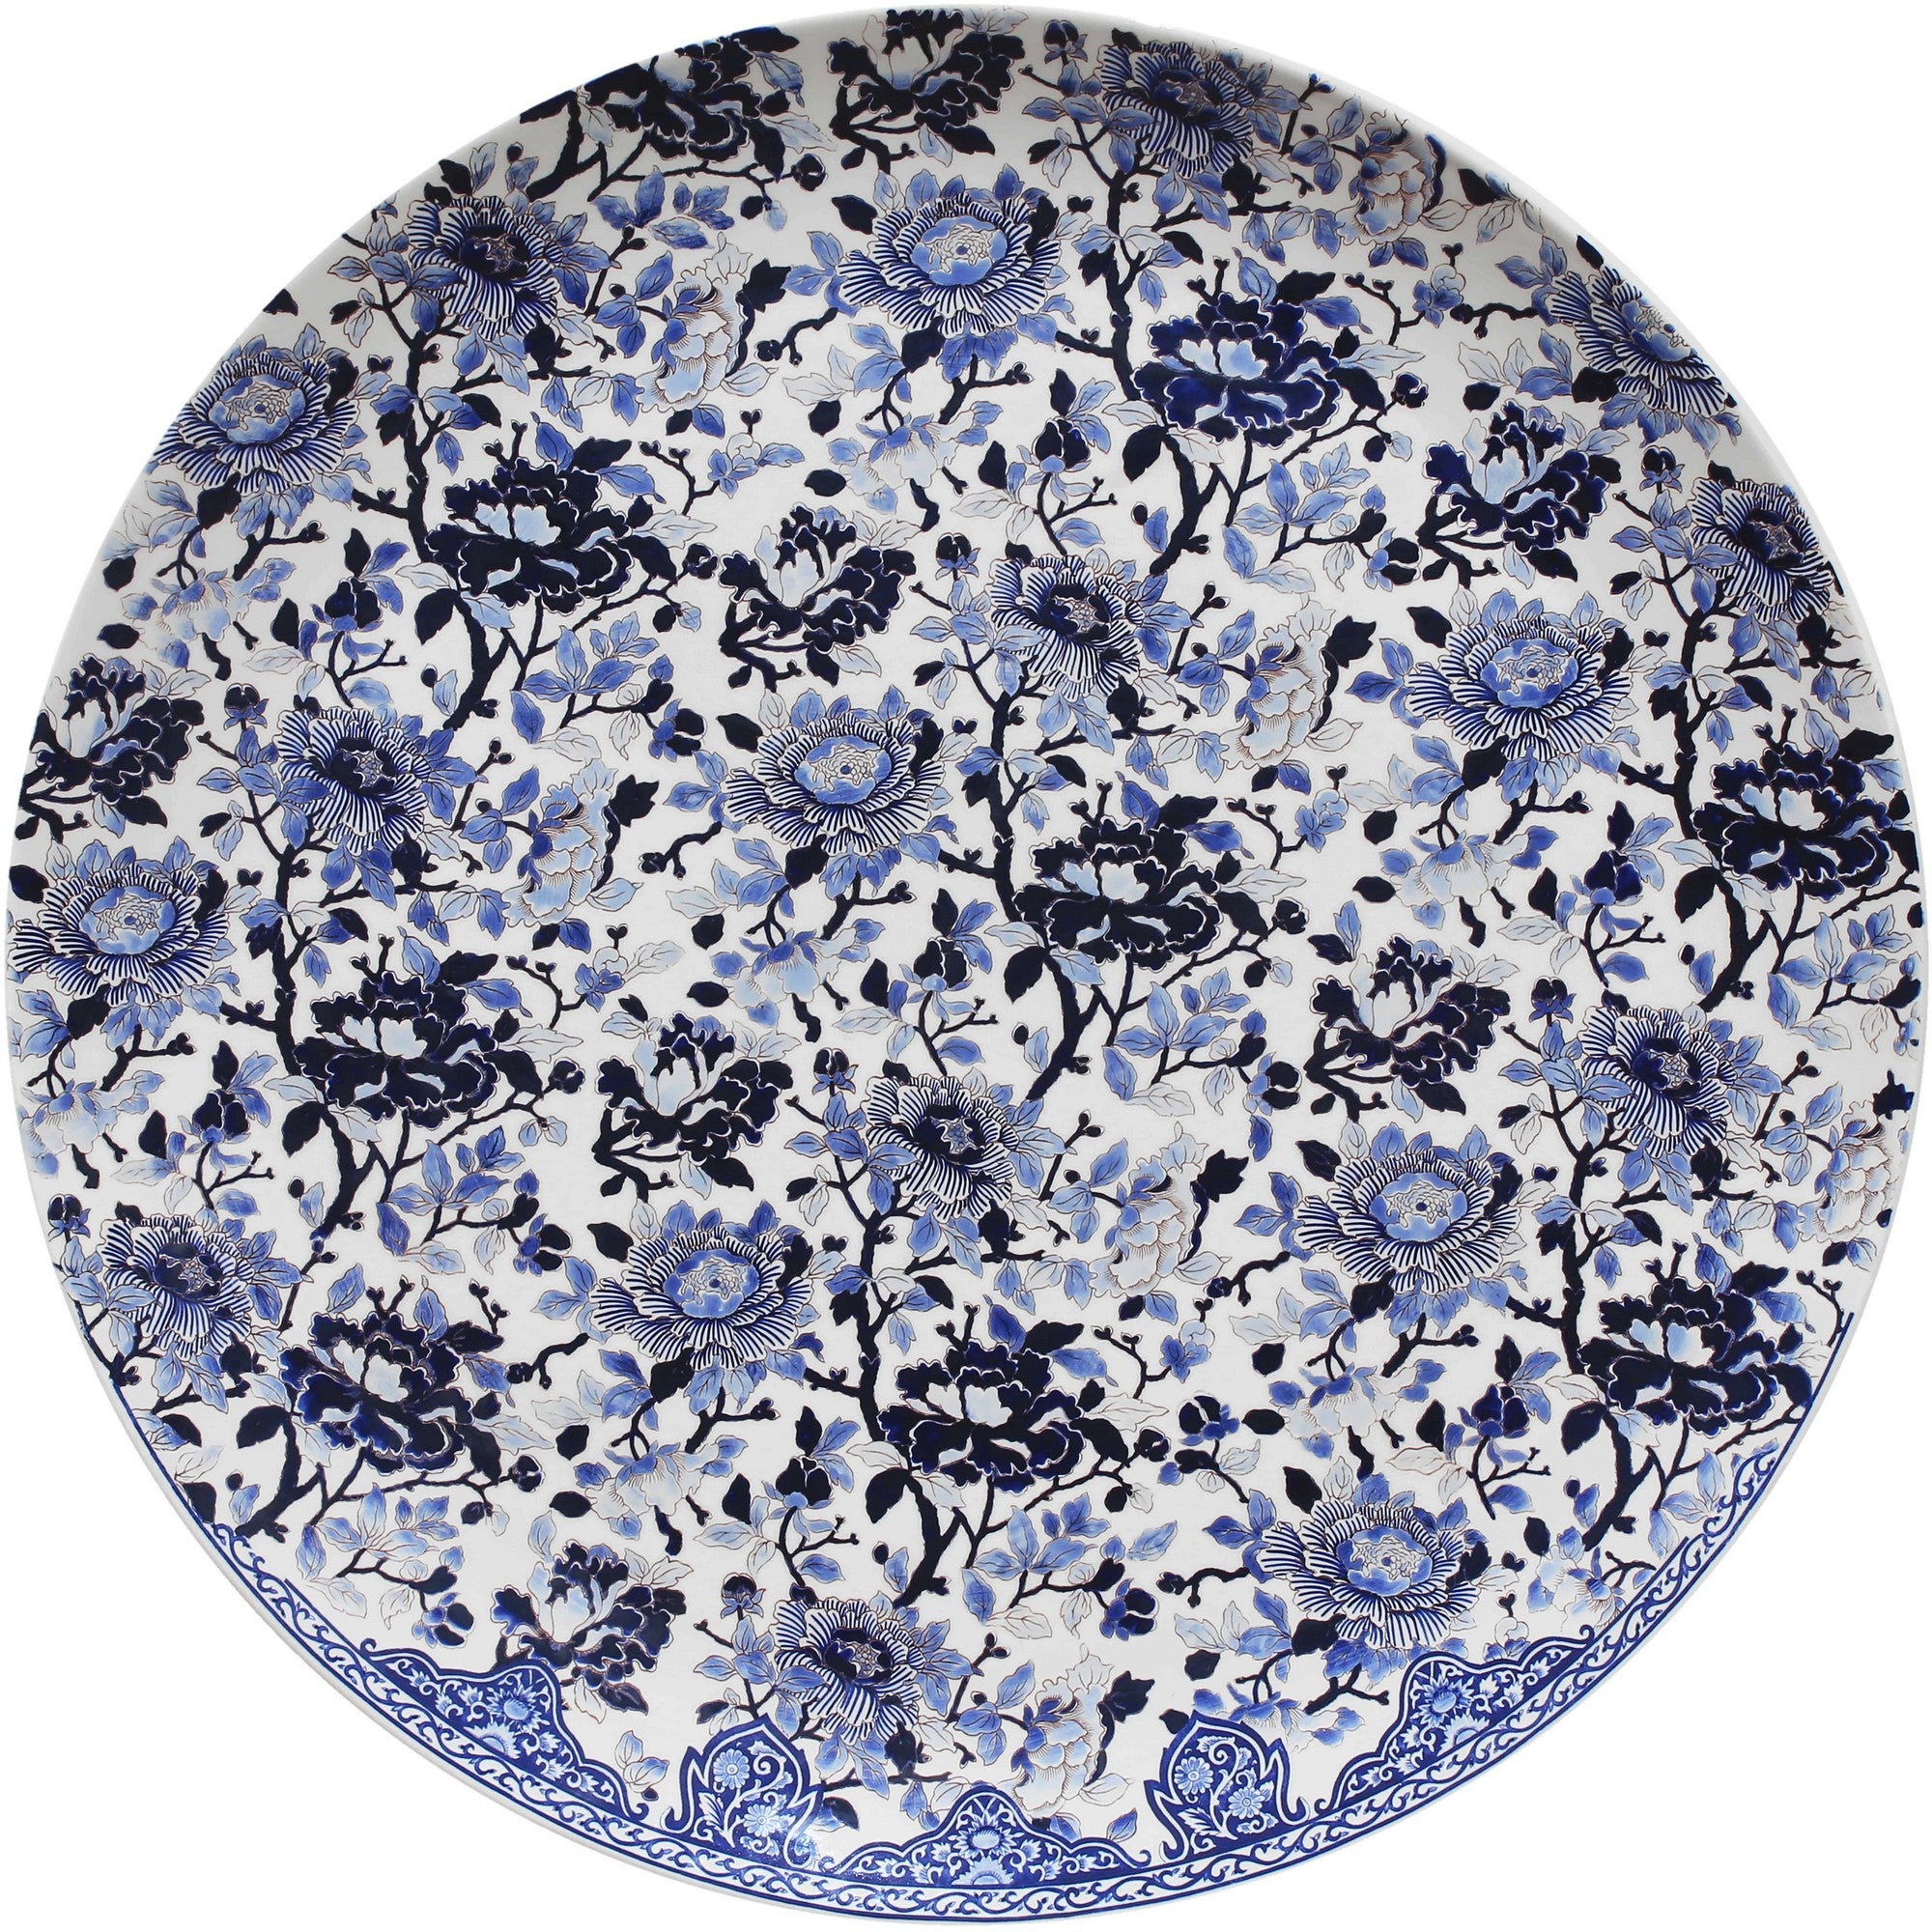 Large Platter Prestige Pivoines Bleues, Hand Painted, Limited Edition